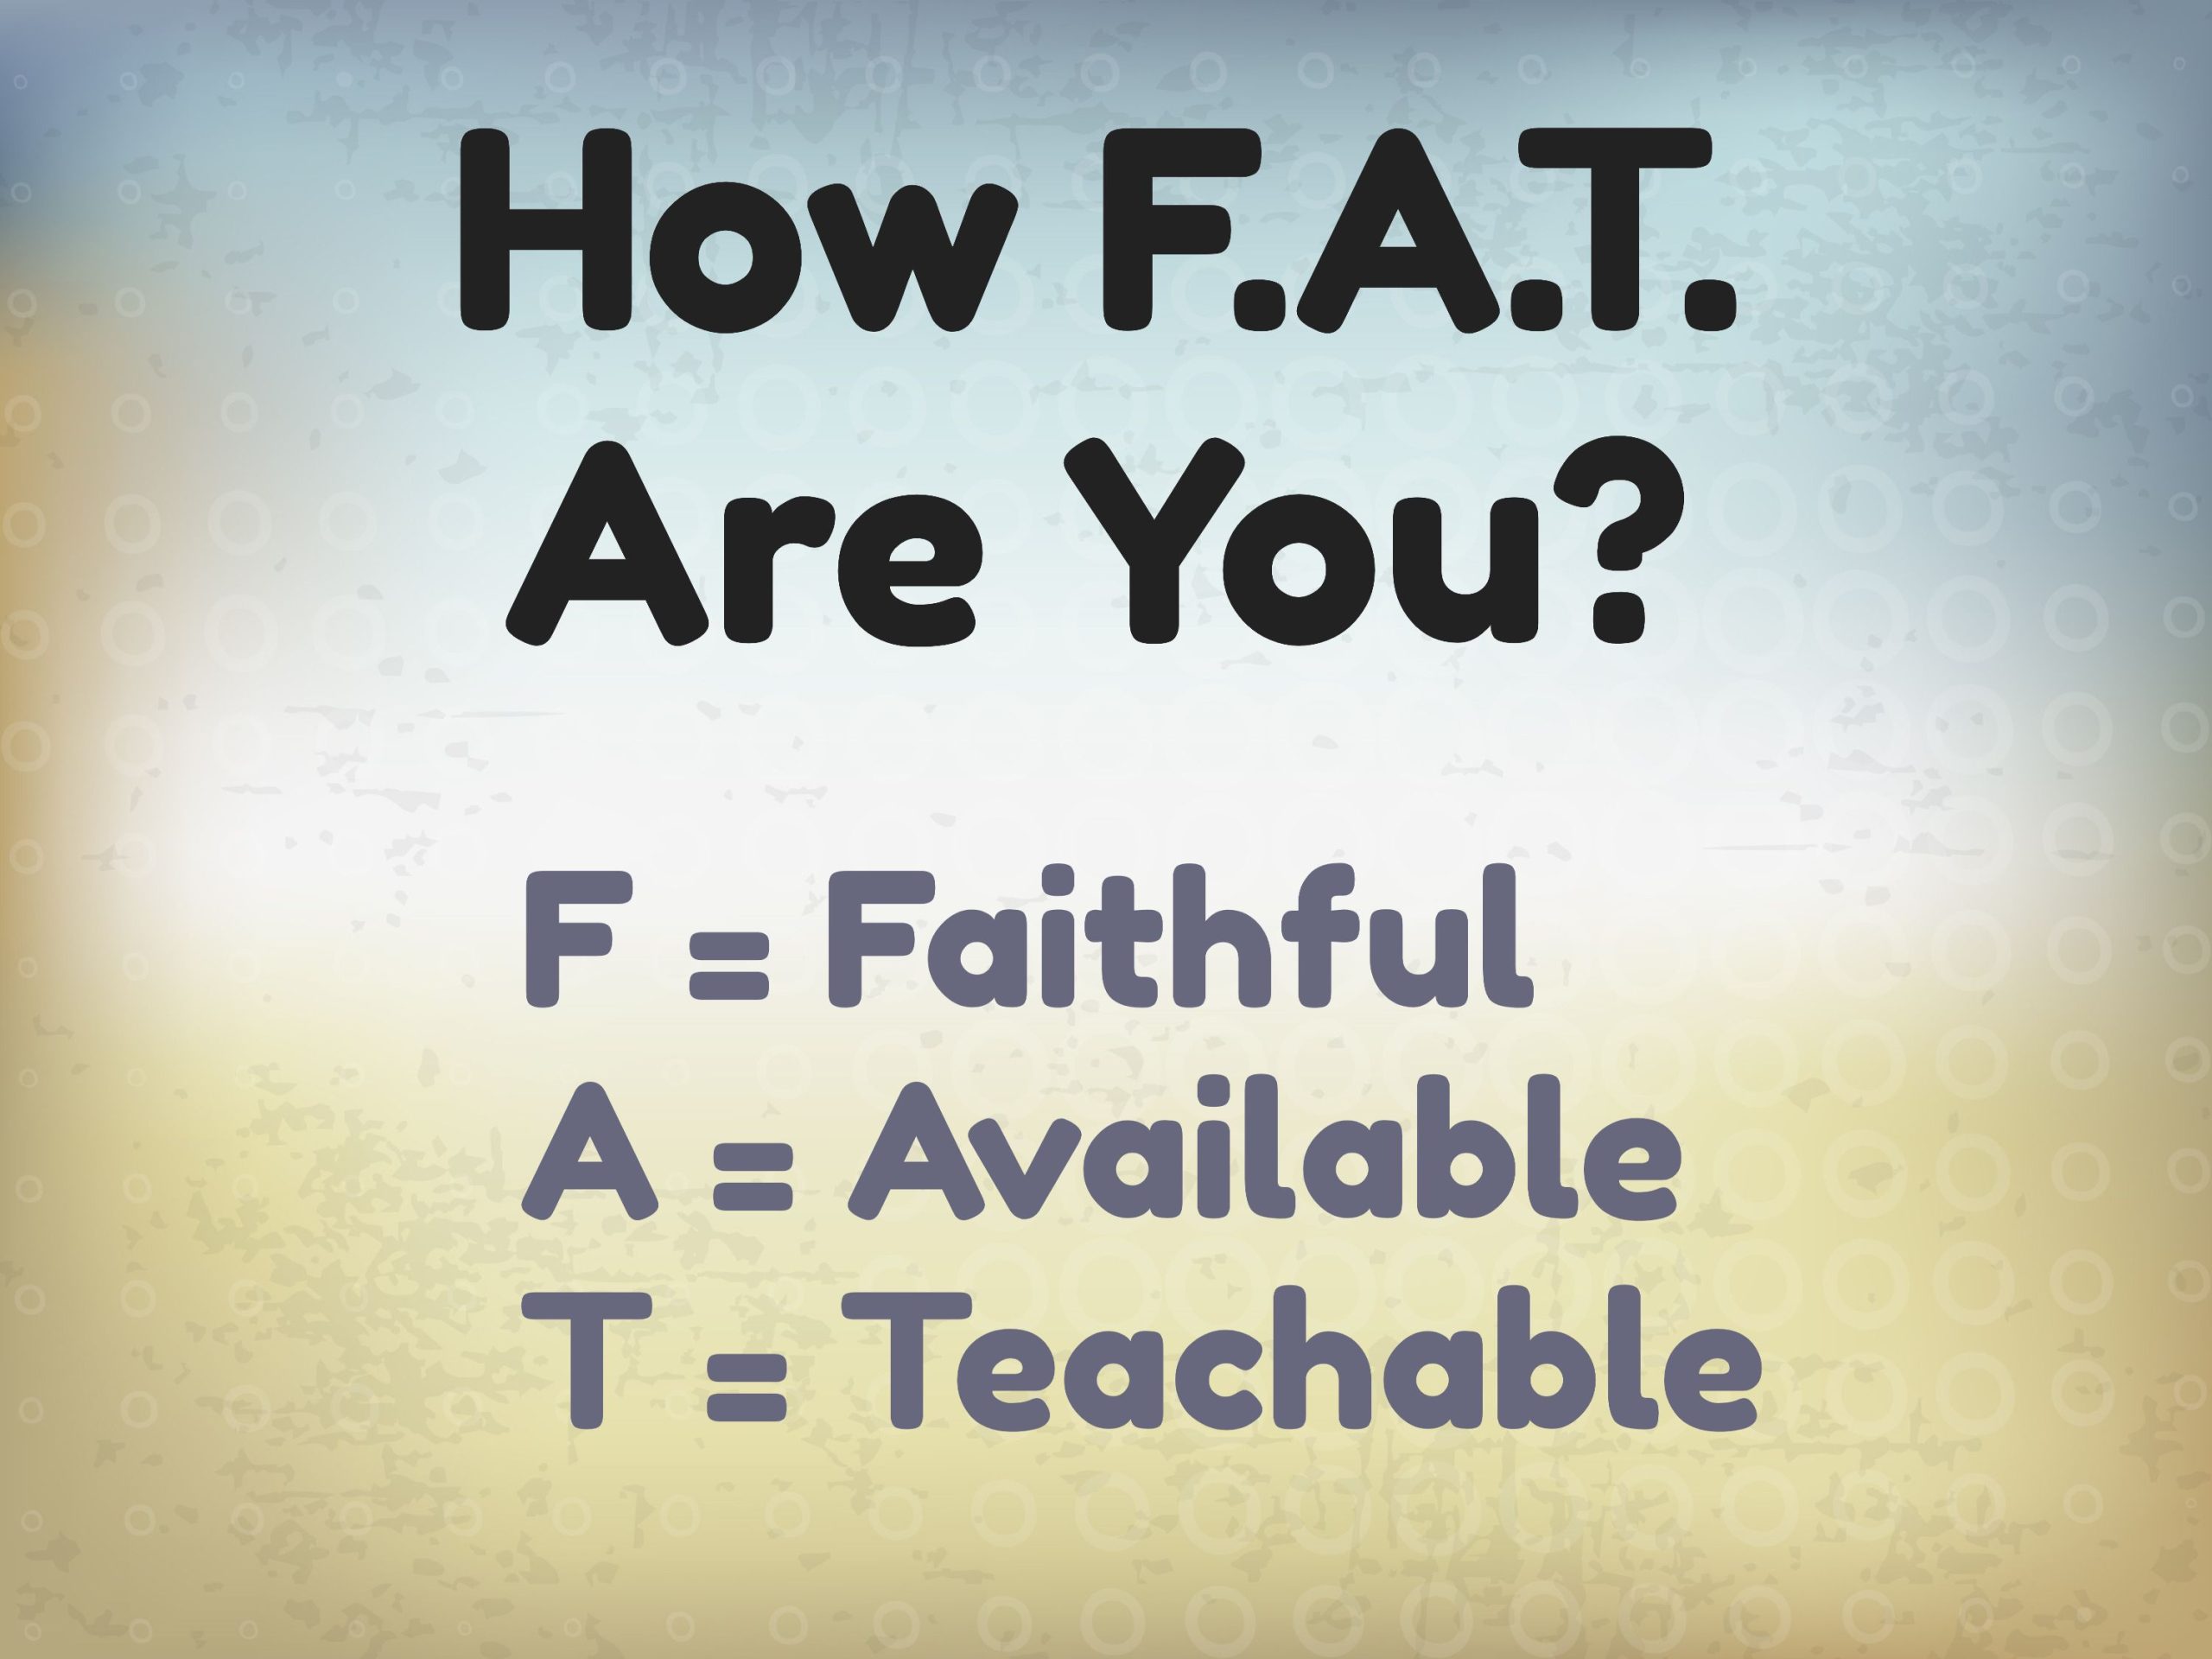 How F.A.T. Are You?